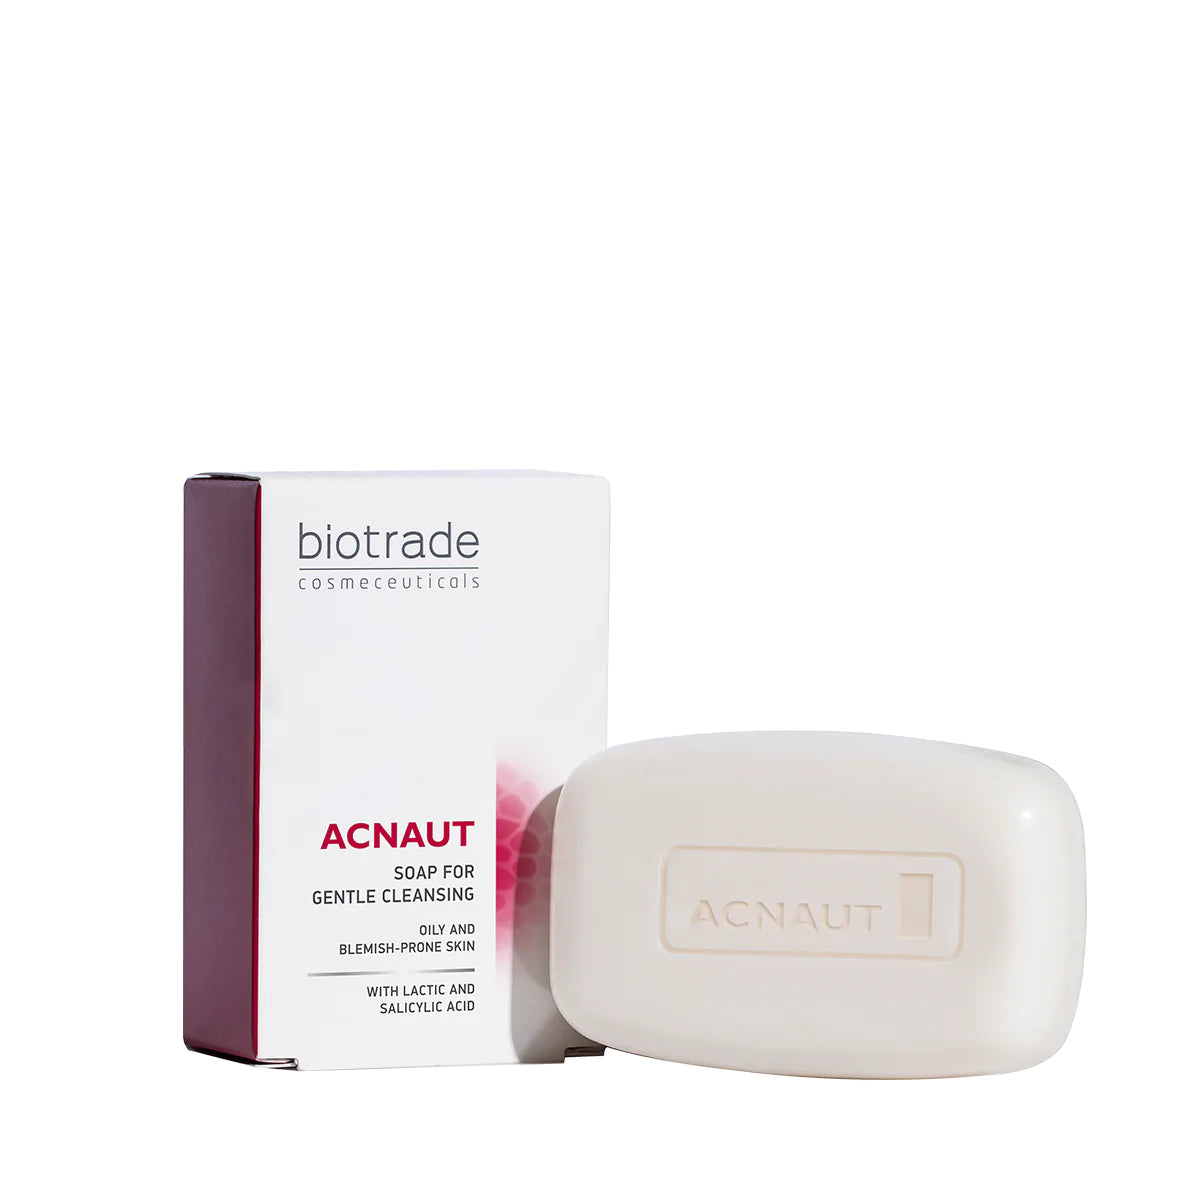 Acnaut Soap For Gentle Cleansing